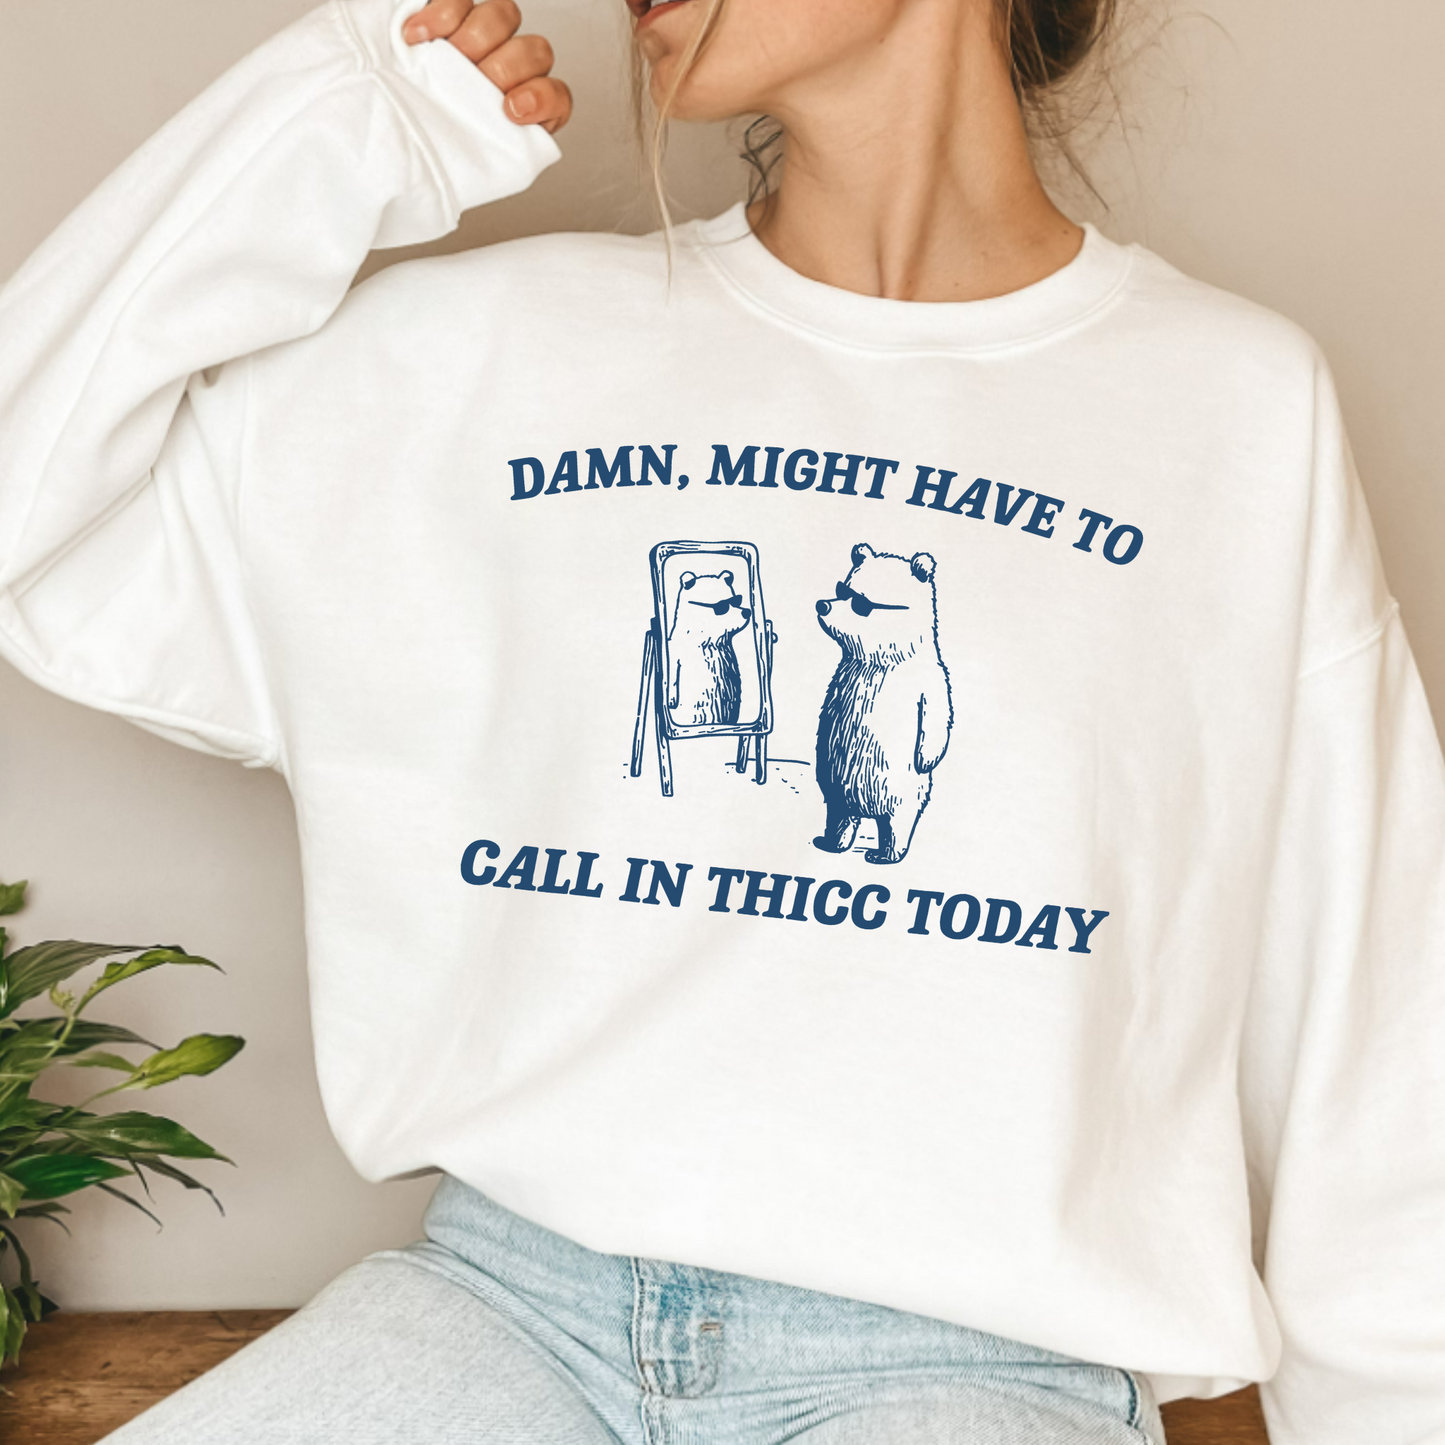 (Shirt not included) Might Have to Call in Thicc today - Dark Blue Screen print Transfer